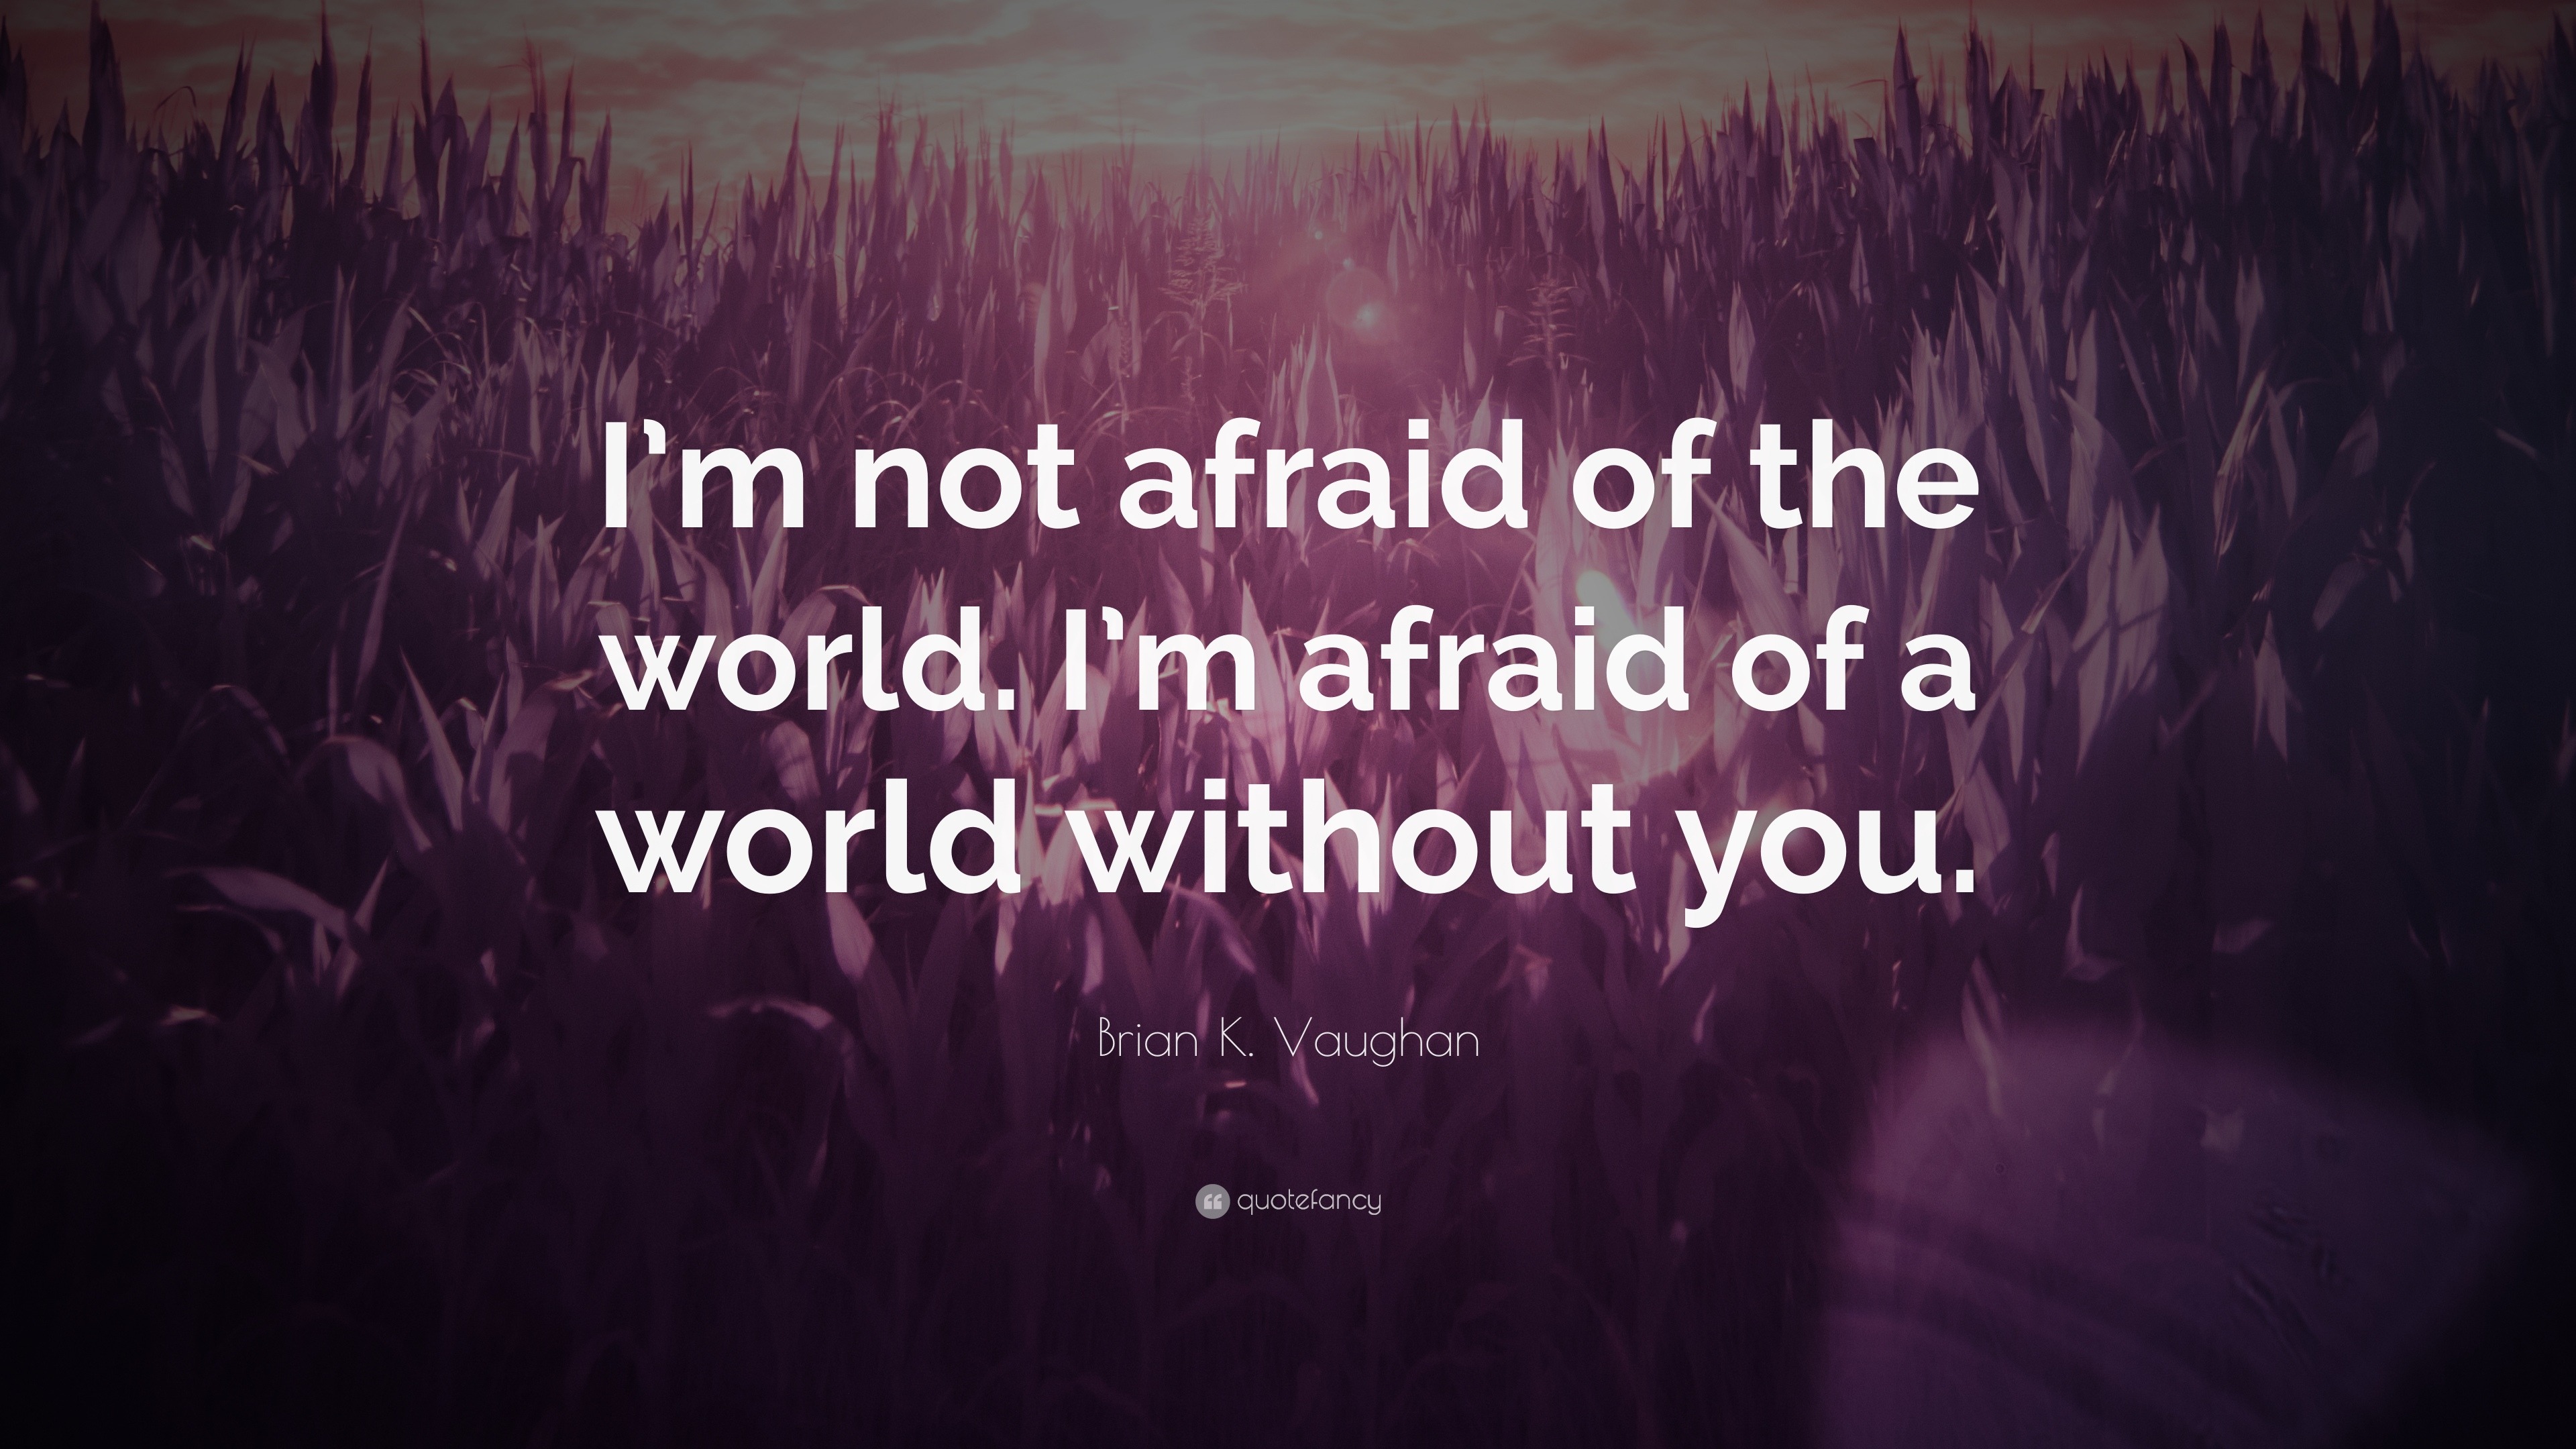 Brian K. Vaughan Quote: “I'm Not Afraid Of The World. I'm Afraid Of A